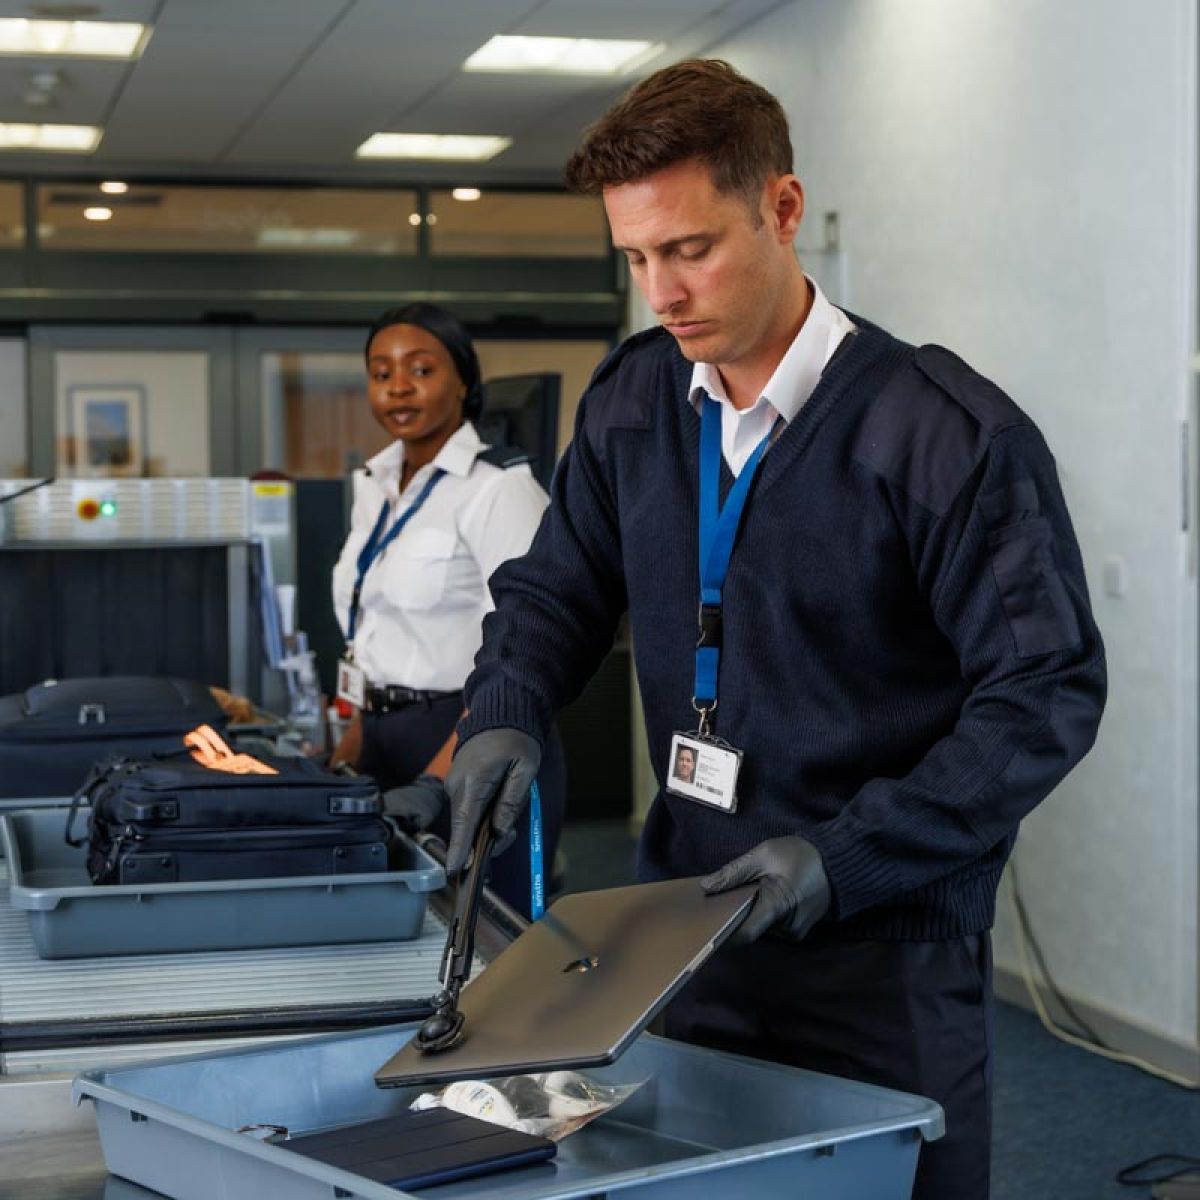 Male and female security staff checking baggage